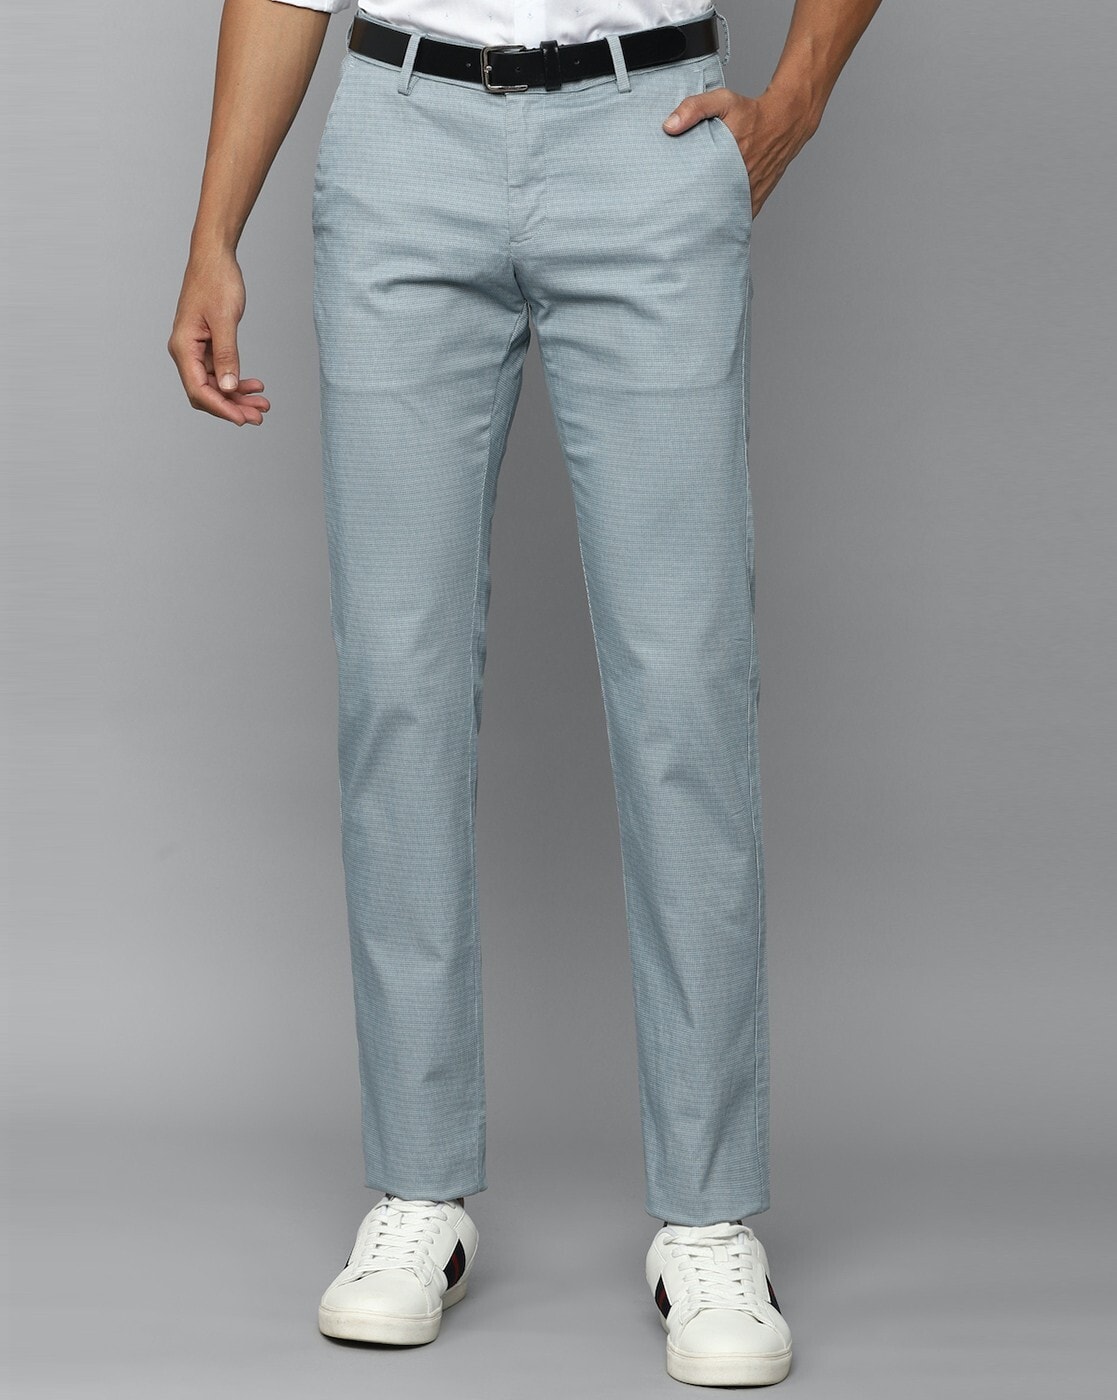 Allen Solly Jeans Trousers  Chinos Allen Solly Blue Trousers for Men at  Allensollycom